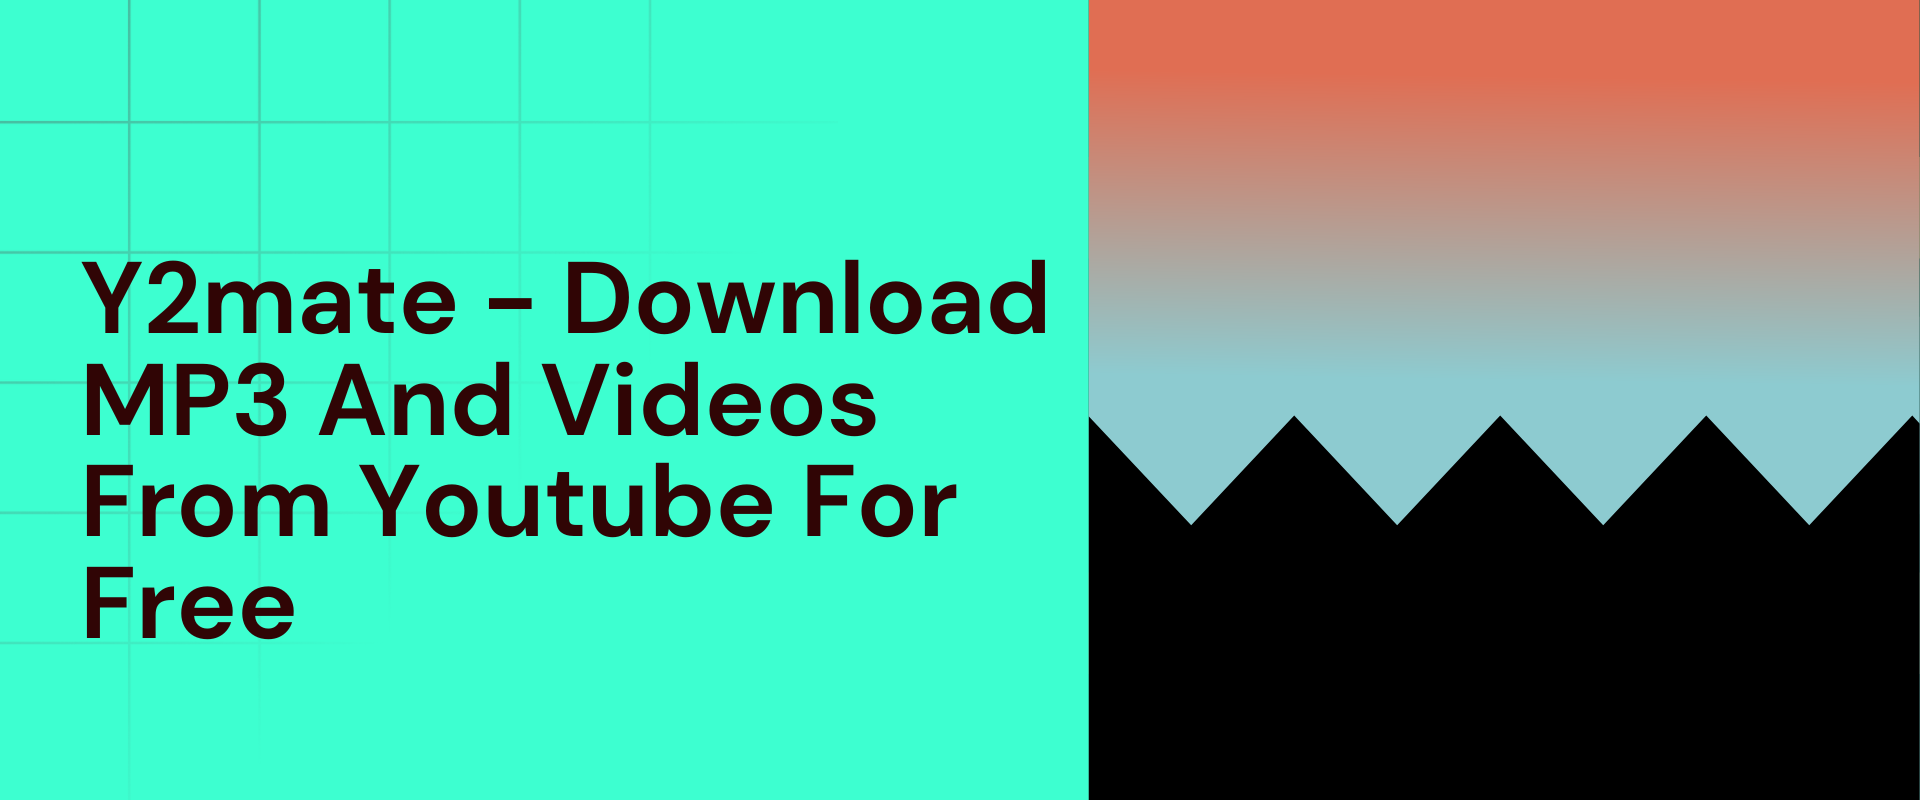 Y2mate – How to Download MP3 And Videos From Youtube Using Y2Mate (For Free)